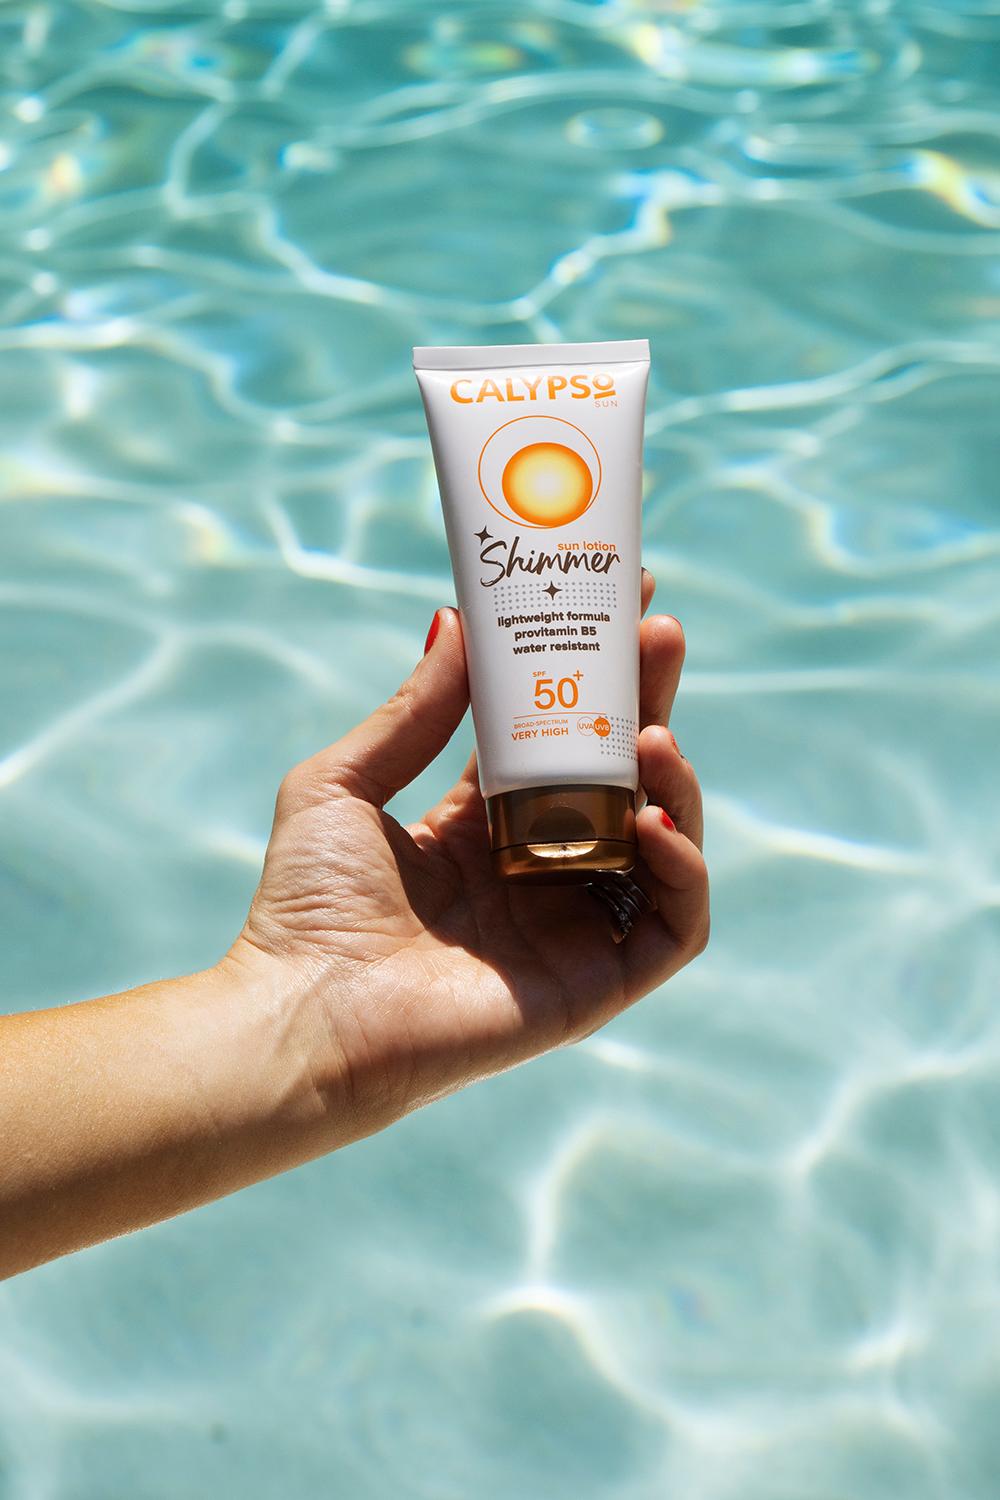 Calypso Shimmer Sun Lotion SPF50 by the pool